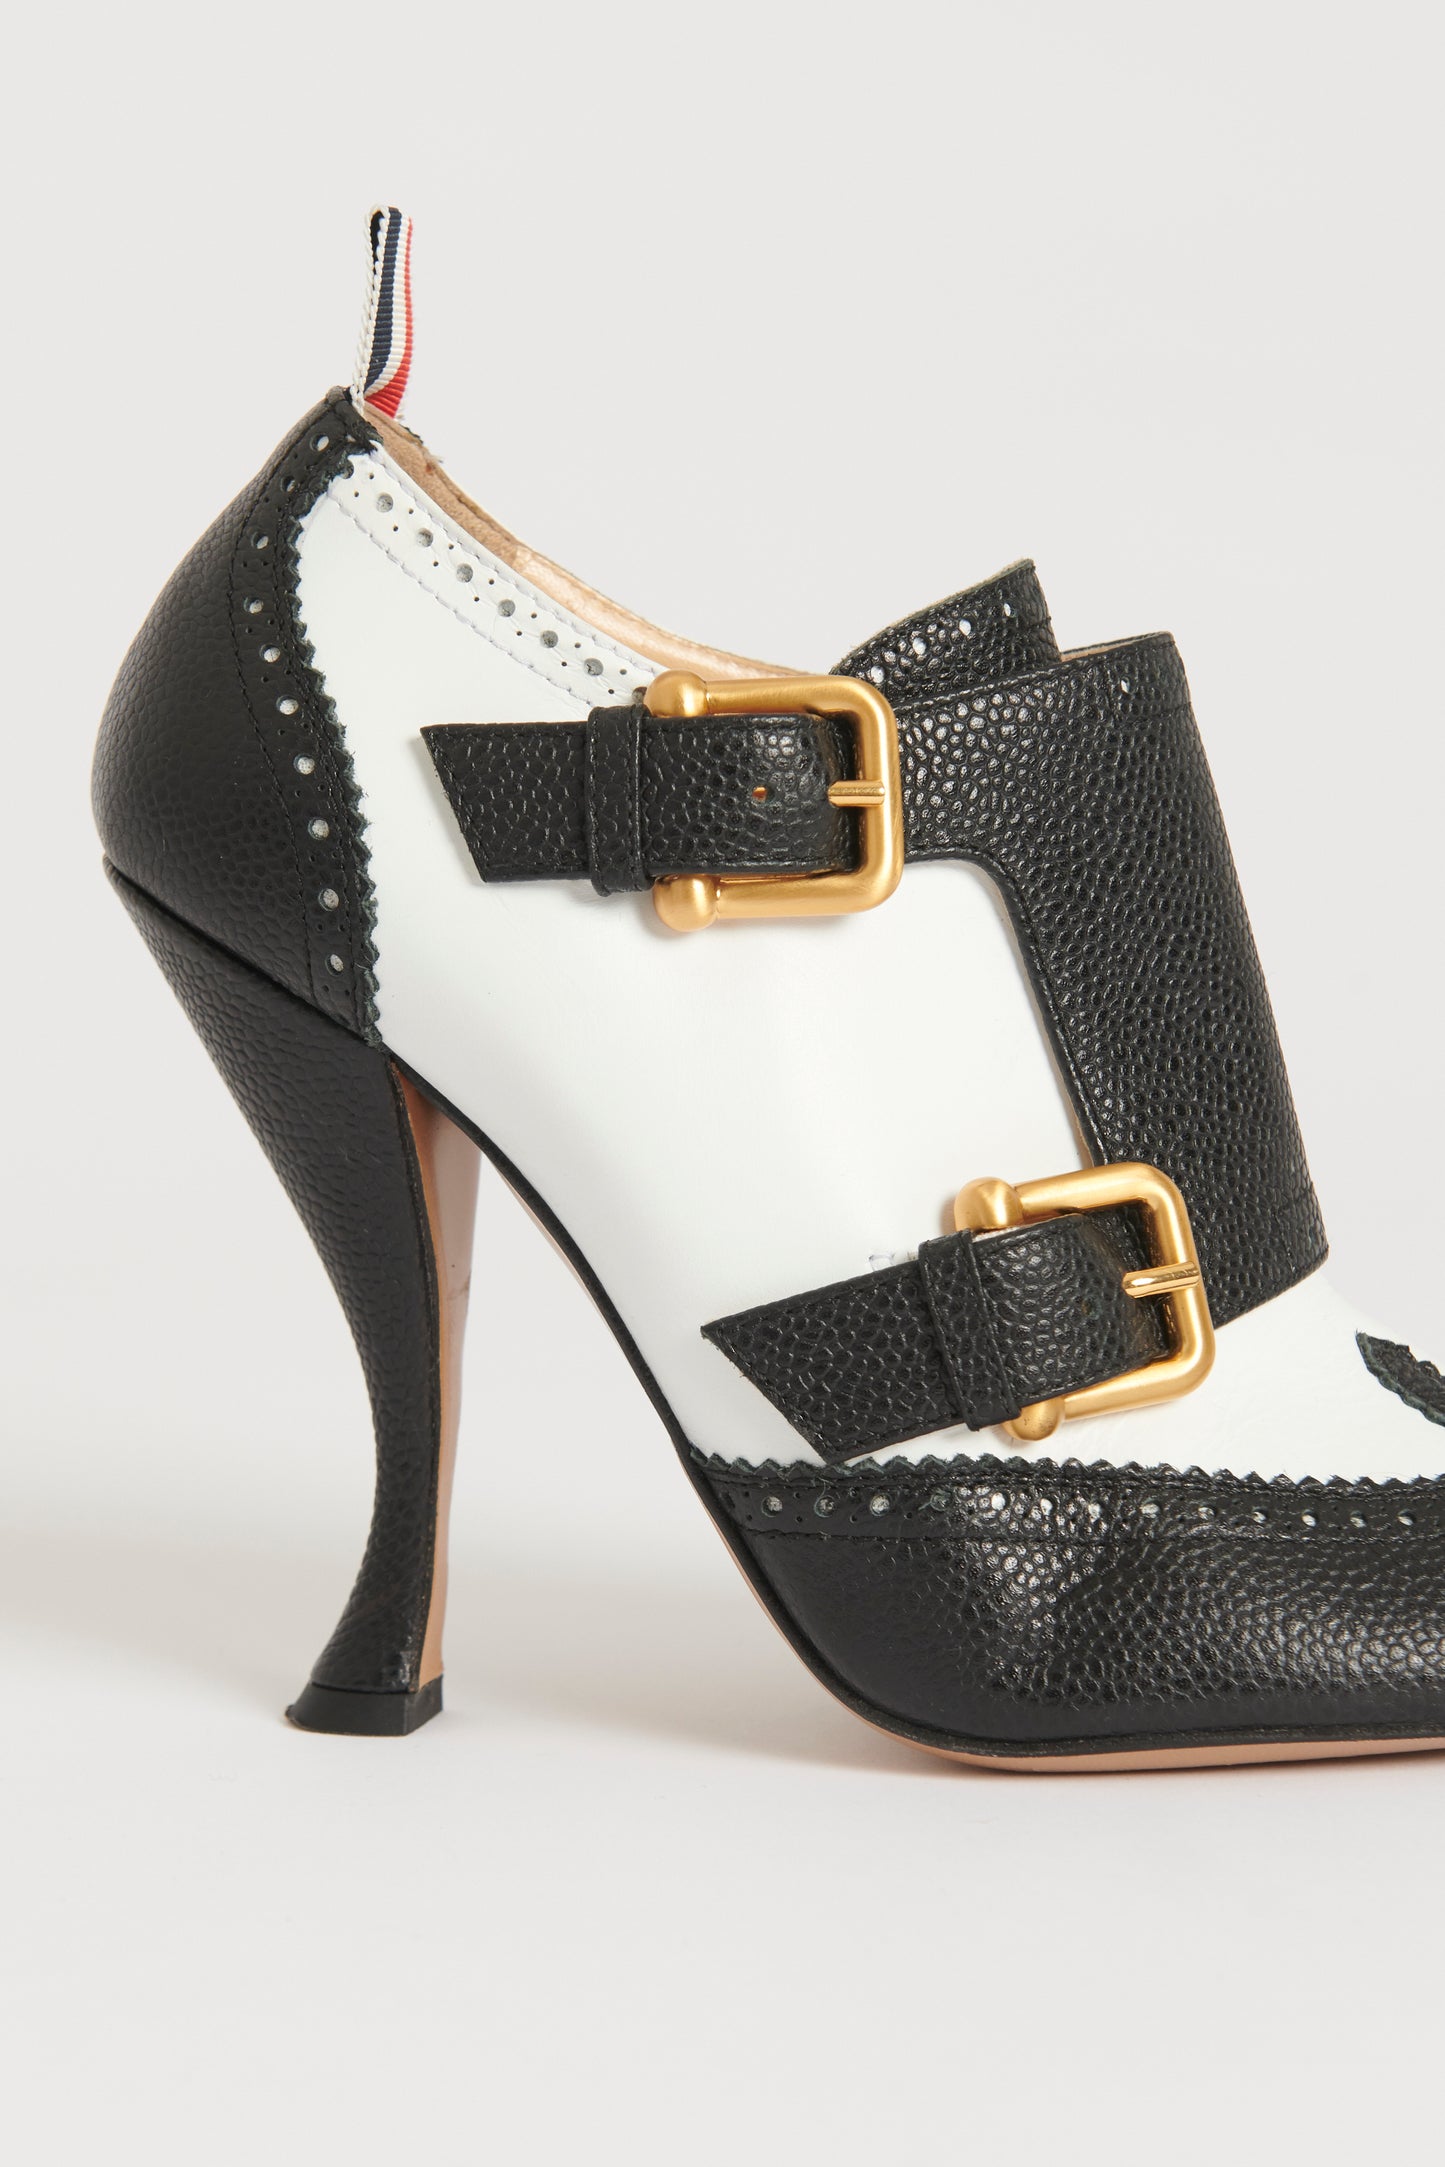 Two Tone Buckled Brogue Style Preowned Heels